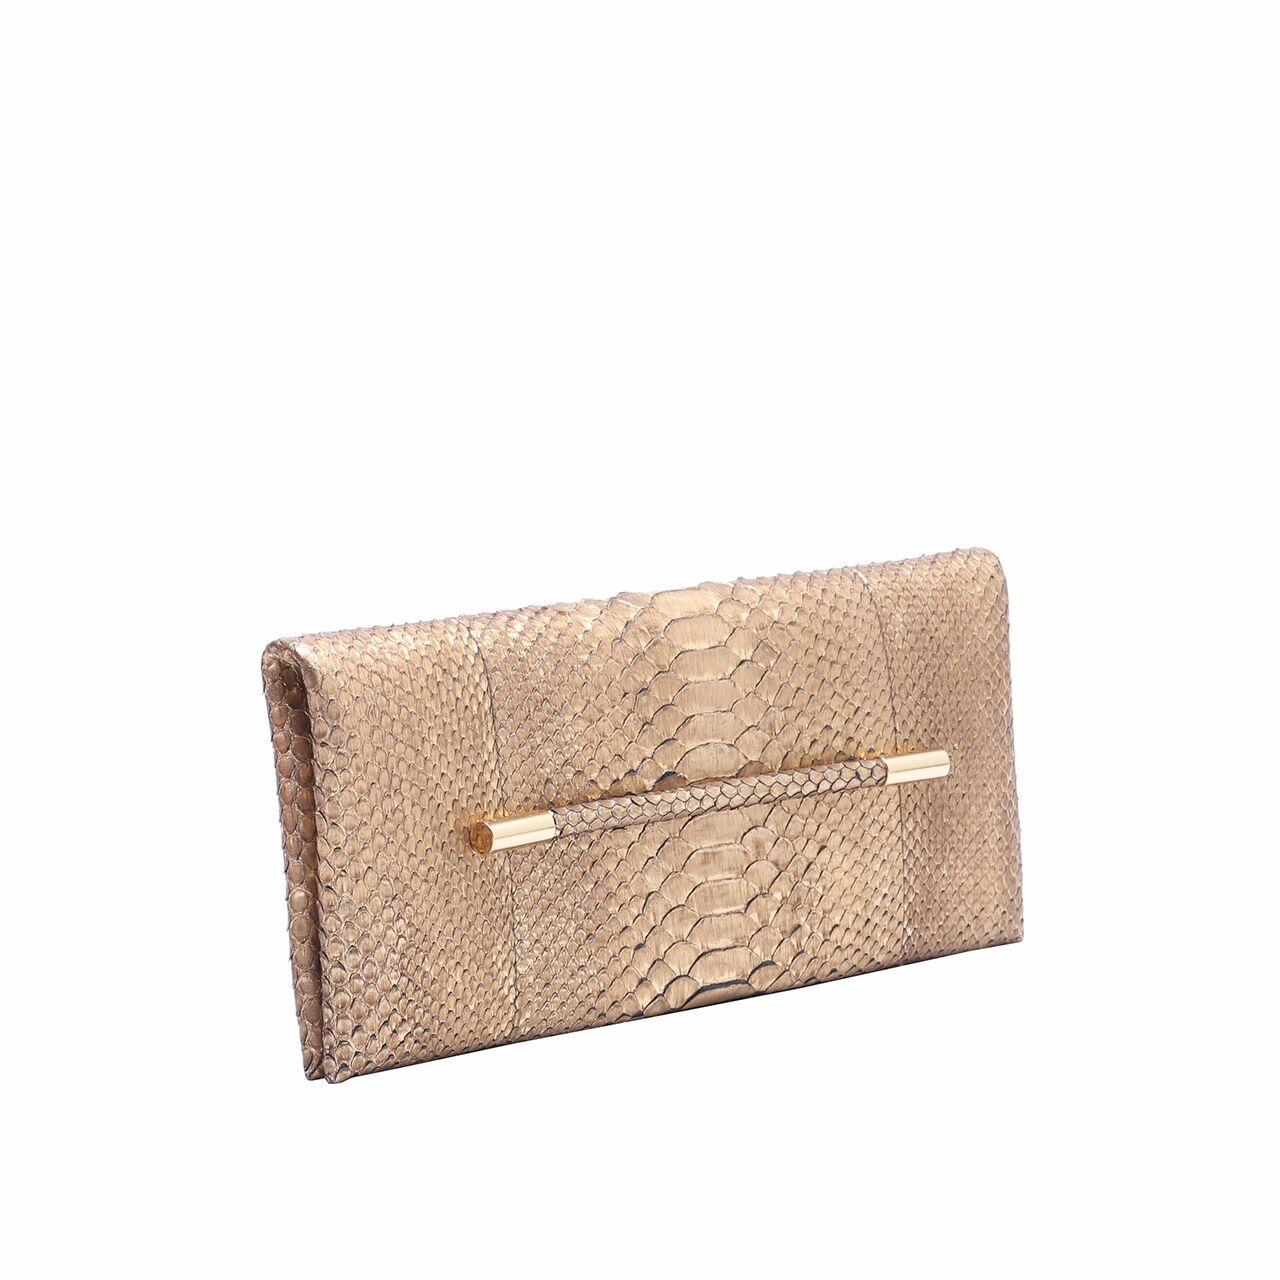 Tom Ford Small Clutch With Handle in Python Leather Gold Clutch